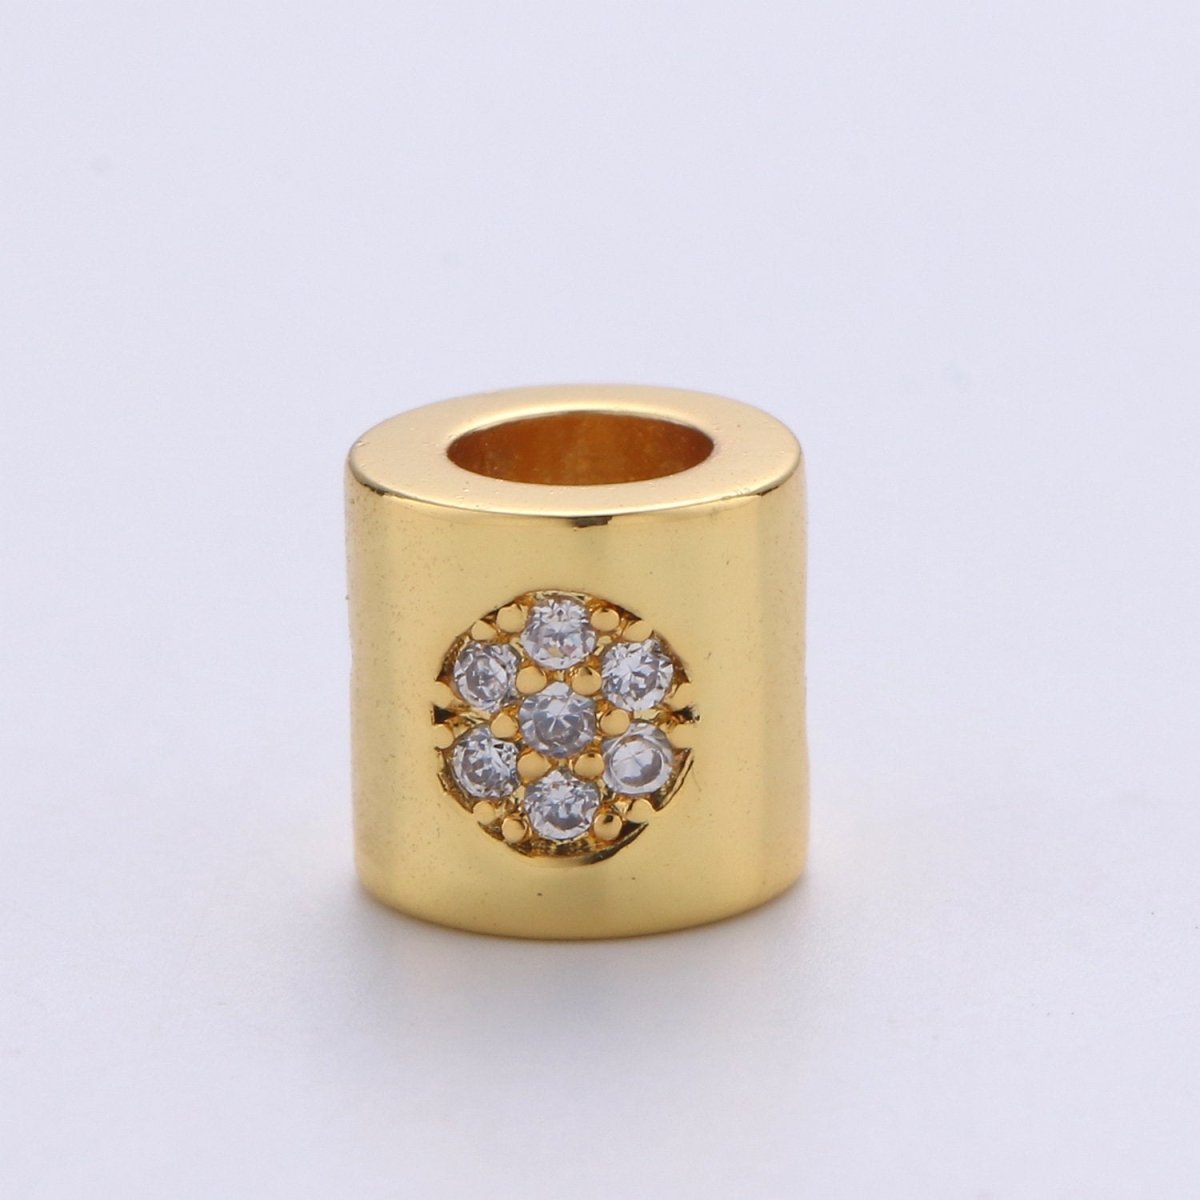 6mm Bead CZ Gold Filled Beads Celestial Beads Moon Sun Star Beads Micro Pave cylinder BeadsCharm for Bracelet Necklace Supply 4mm Hole B-270 B-271 B-272 - DLUXCA